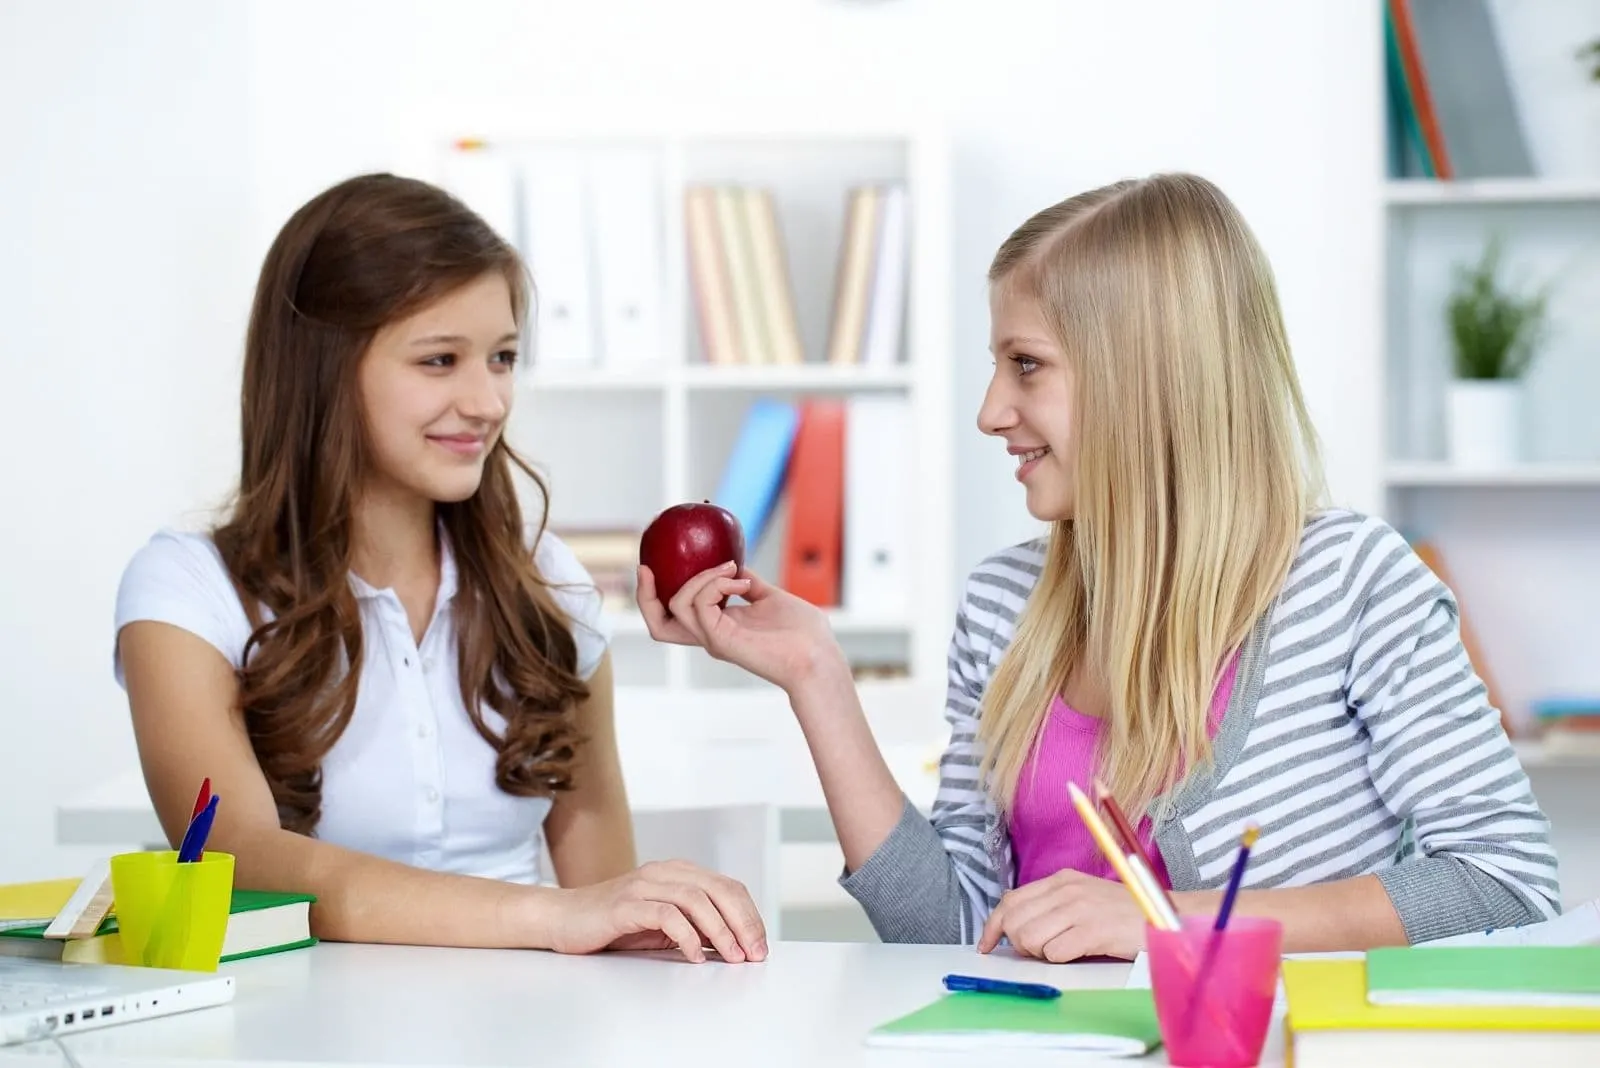 cute beautiful lady giving apple to classmate in an art class